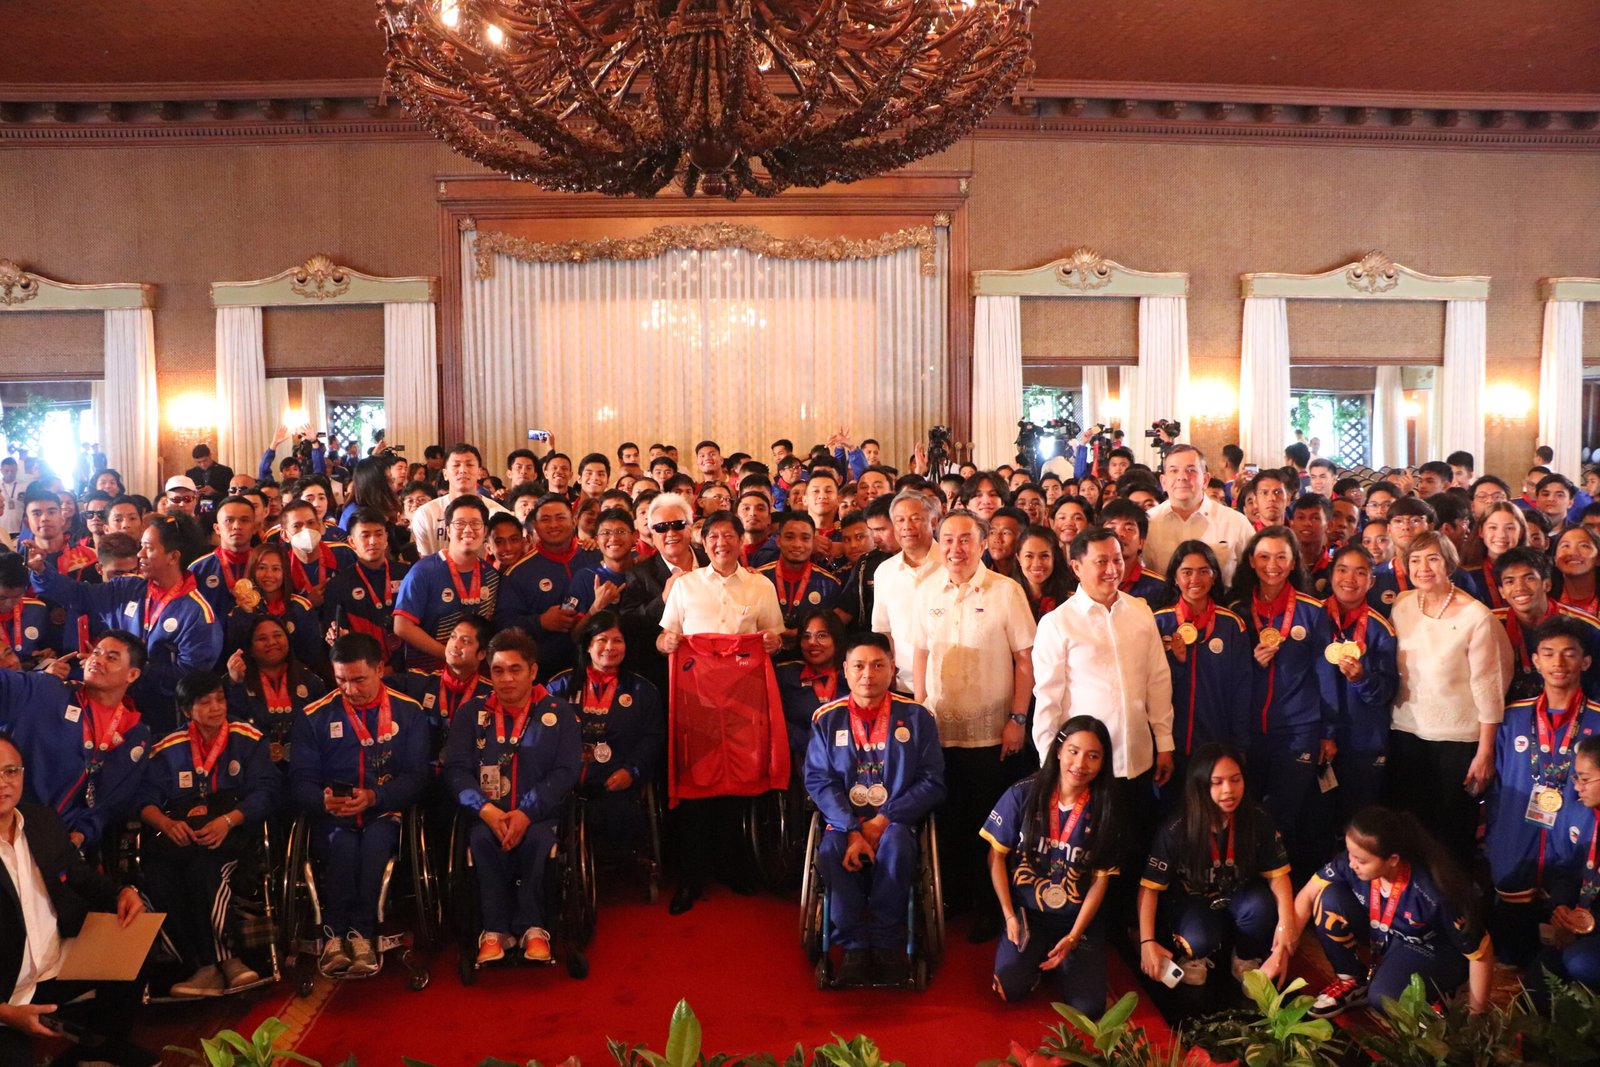 ﻿The 32nd Southeast Asian Games (SEAG) and 12th ASEAN Para Games (APG) medalist with President Ferdinand “Bongbong” Marcos Jr., Philippine Sports Commission (PSC) Chairman Richard Bachman, and PSC Commissioner Olivia "Bong" Coo, Philippine Paralympic Committee (PPC) President Michael Barredo, Philippine Amusement and Gaming Corporation (PAGCOR) Chairman & CEO Alejandro Tengco, Philippine Olympic Committee (POC) President Abraham "Bambol" Tolentino and Senator Francis Tolentino in the Incentives Awarding at Malacanang Palace, Wednesday, August 9, 2023.